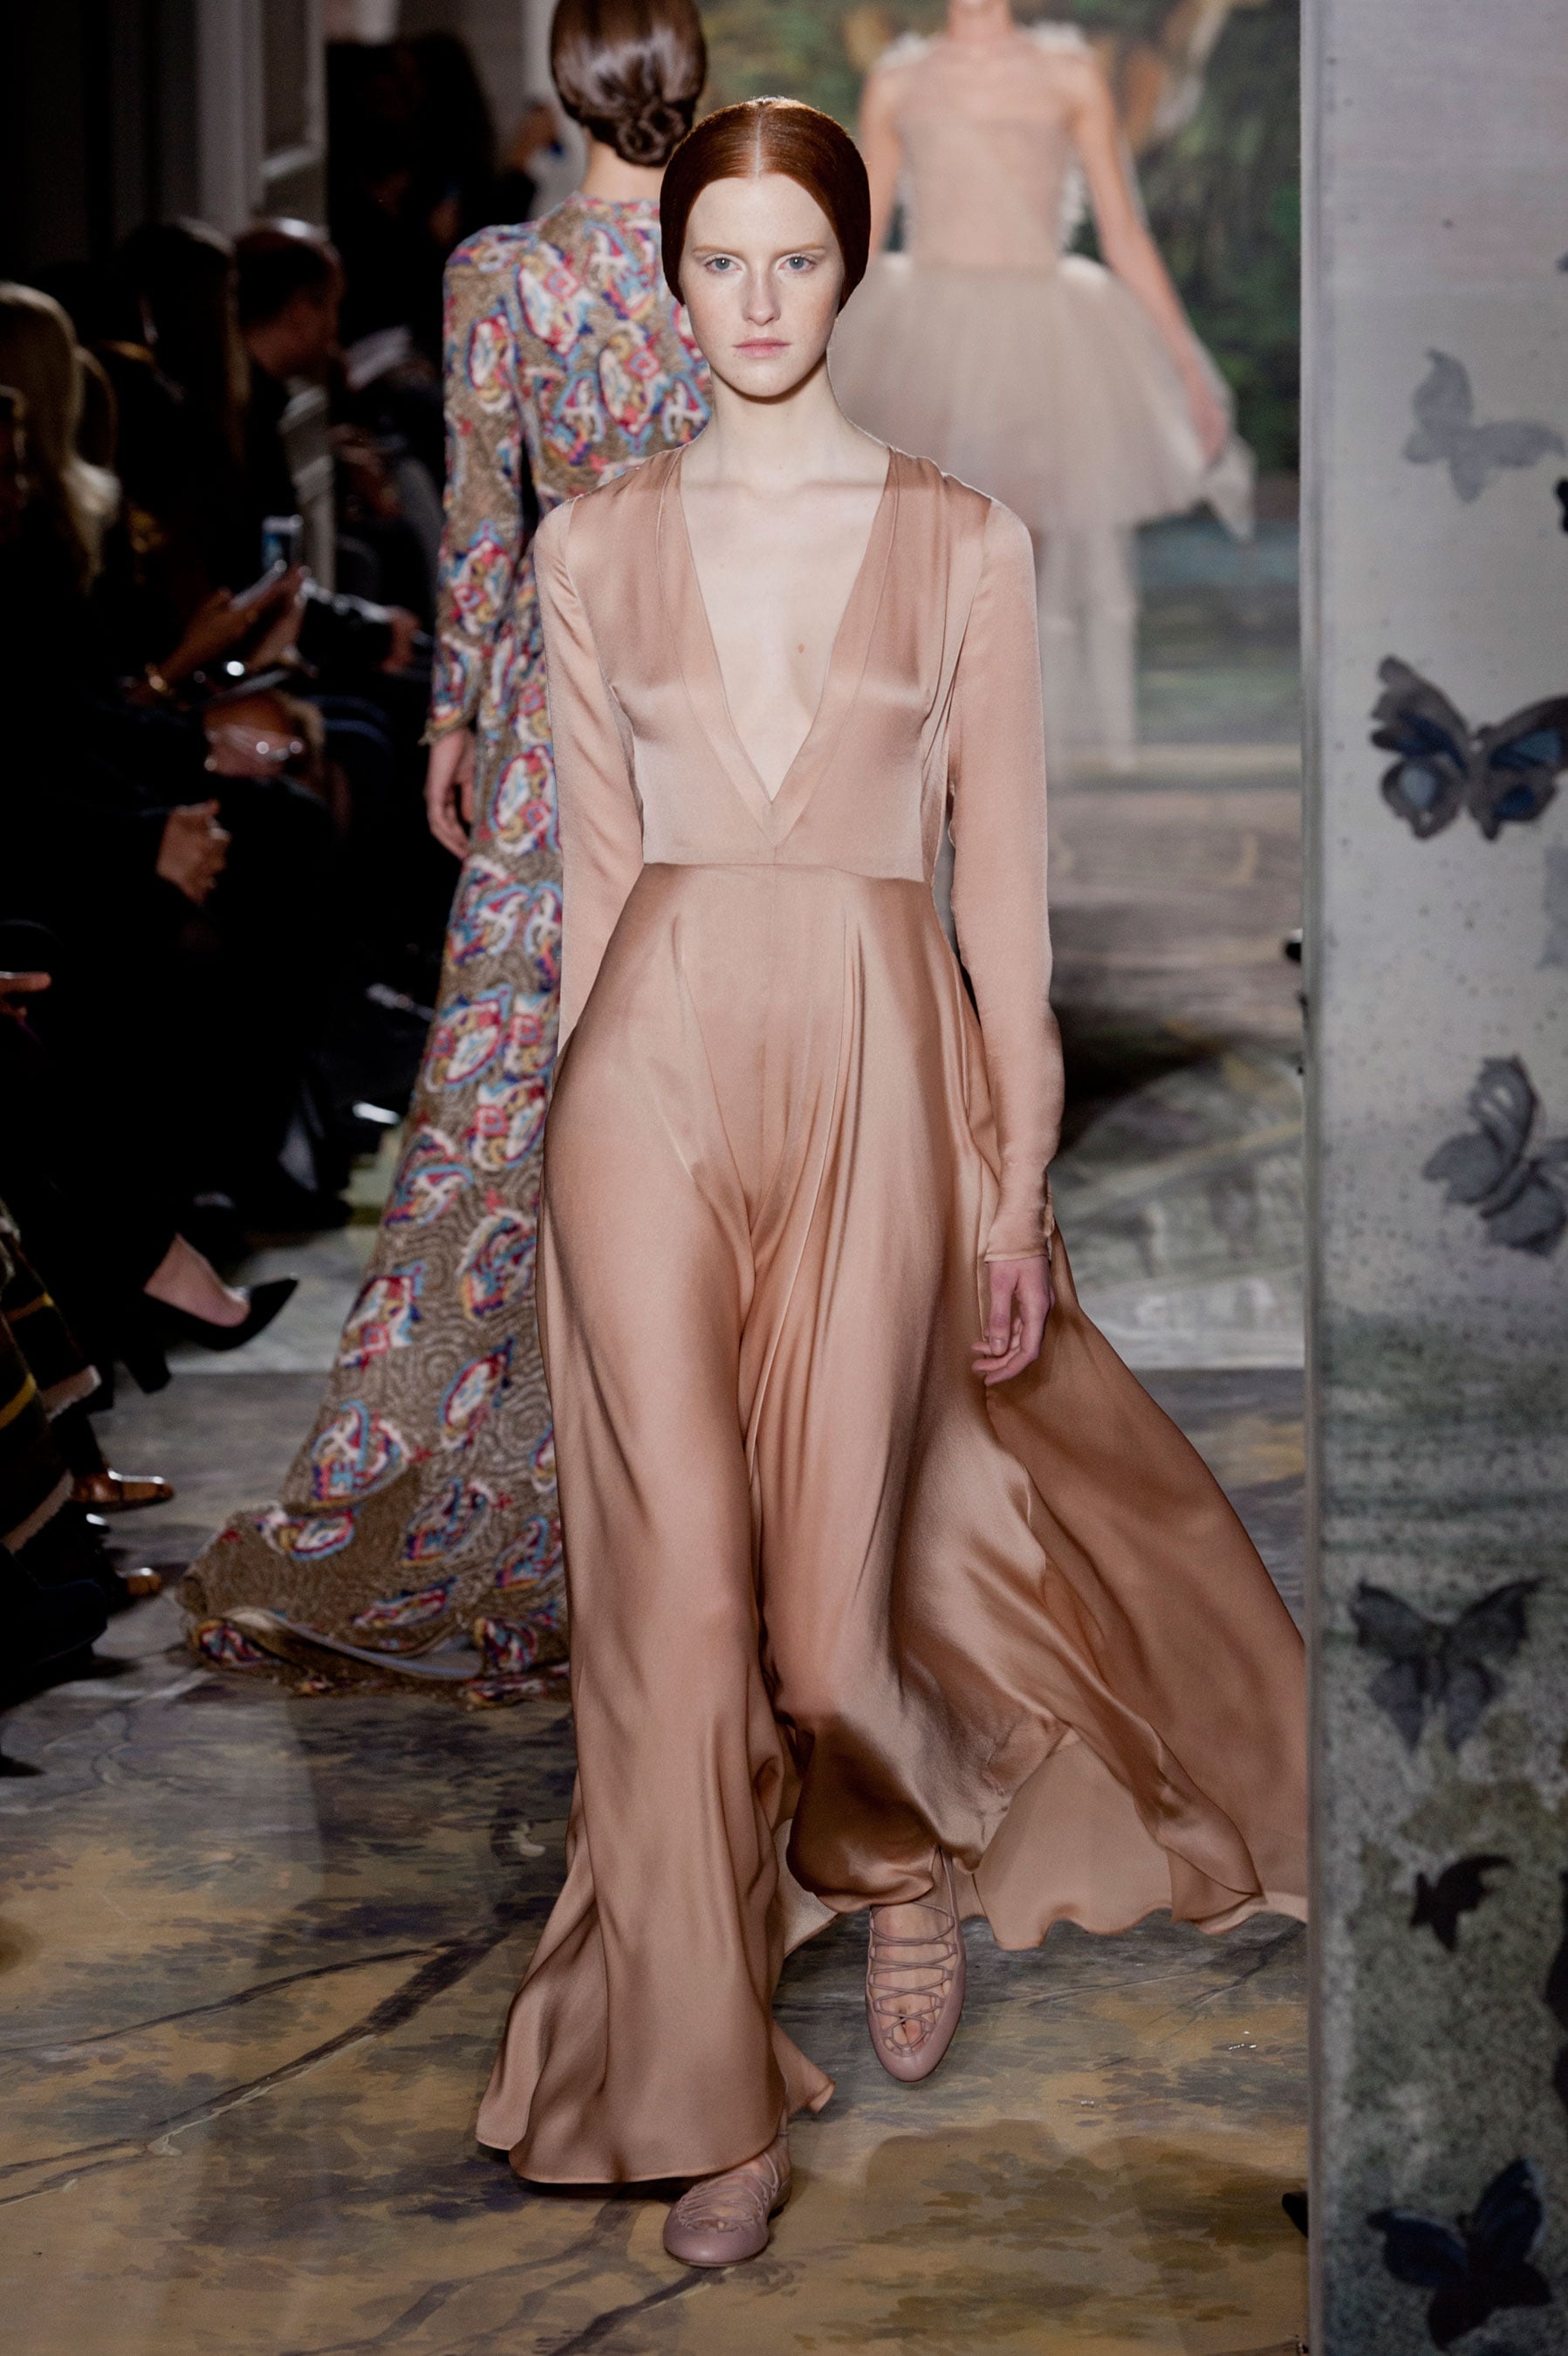 Valentino Haute Couture Spring 2014 | Valentino Haute Couture Gives a Whole Other Kind of Swan Song | POPSUGAR Fashion Photo 48